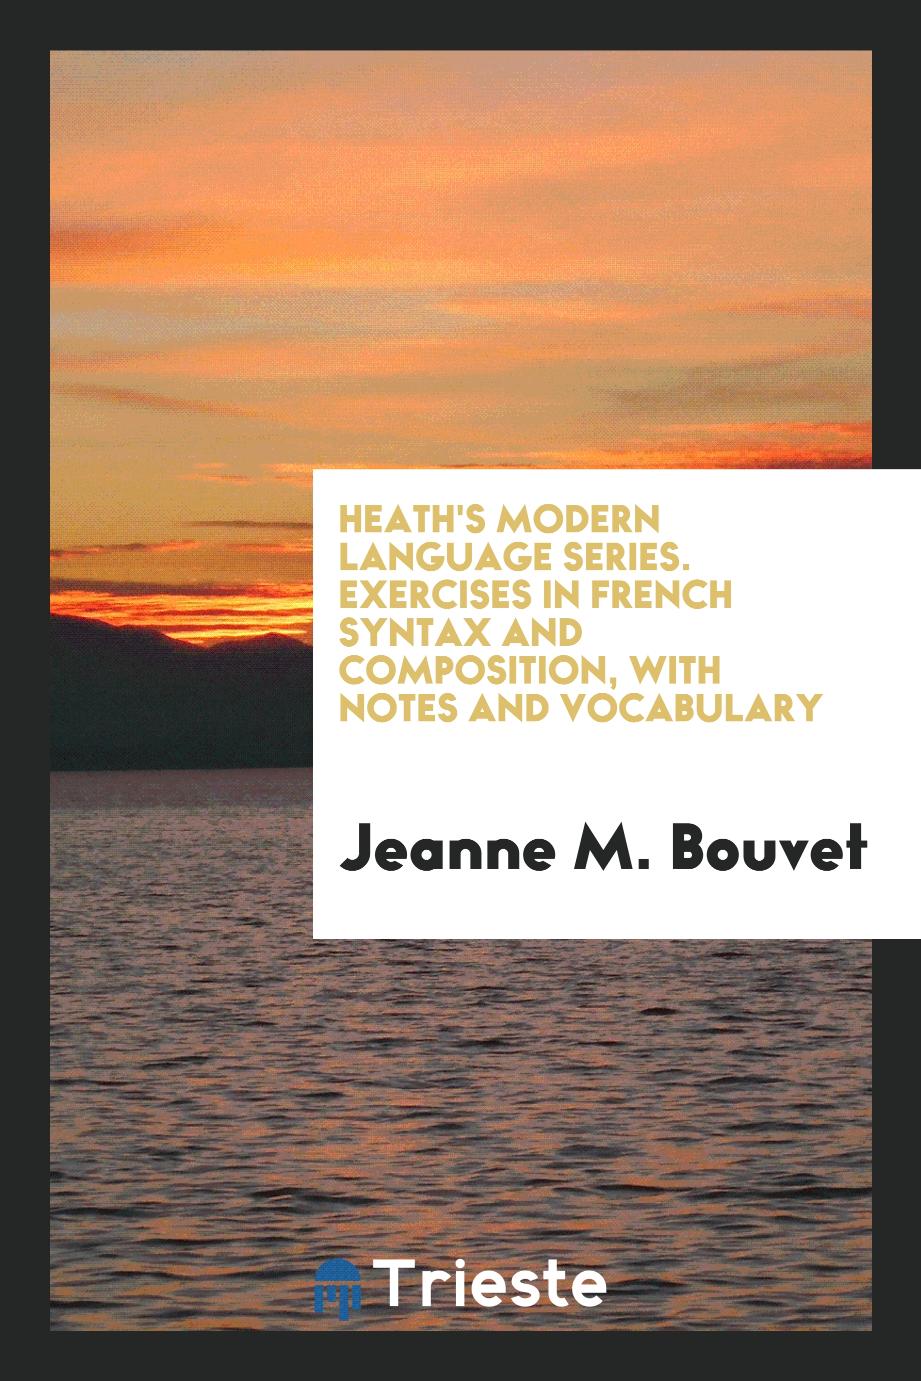 Heath's Modern Language Series. Exercises in French Syntax and Composition, with Notes and Vocabulary